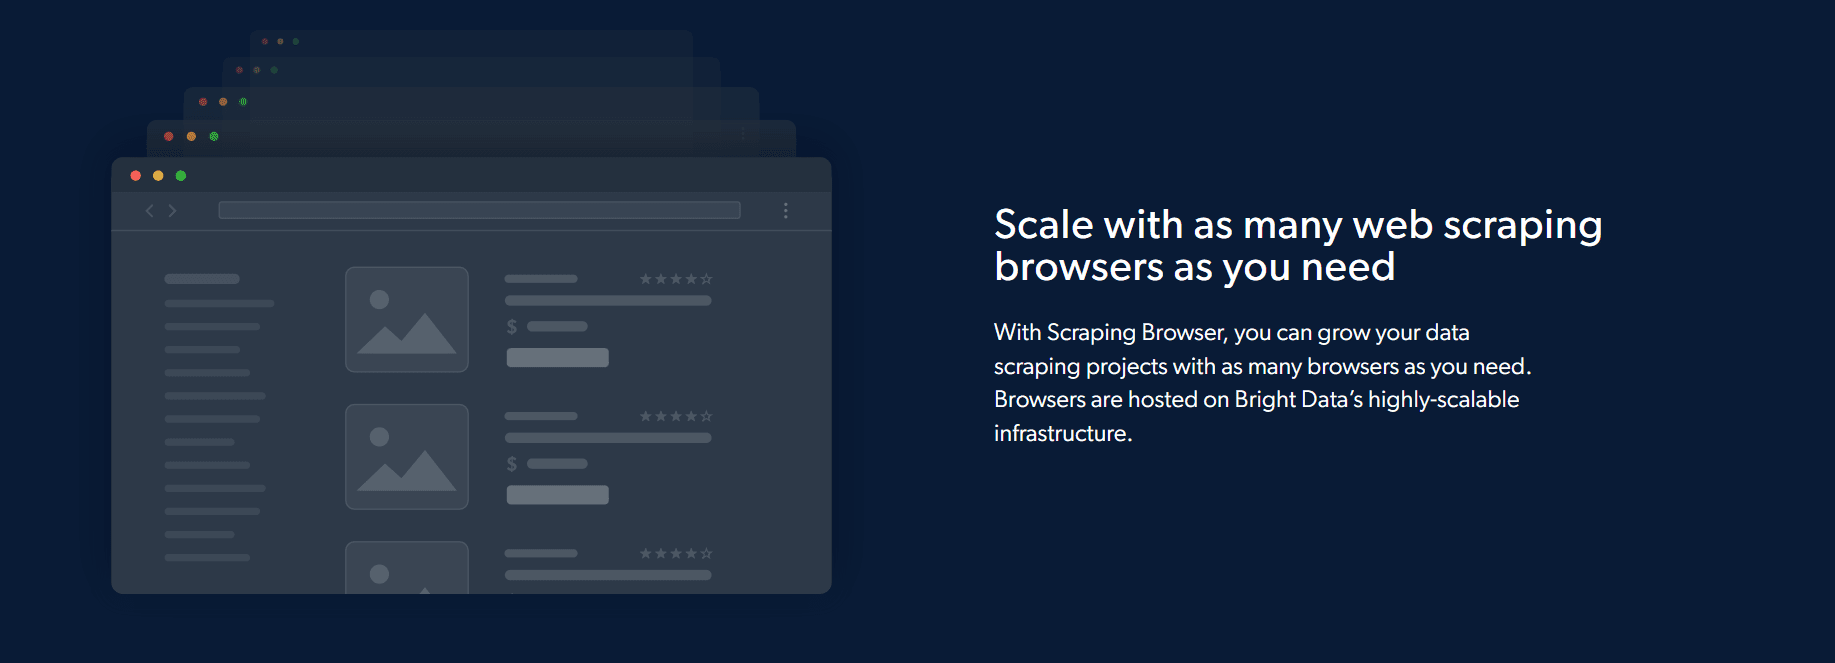 bright data browser scaling feature